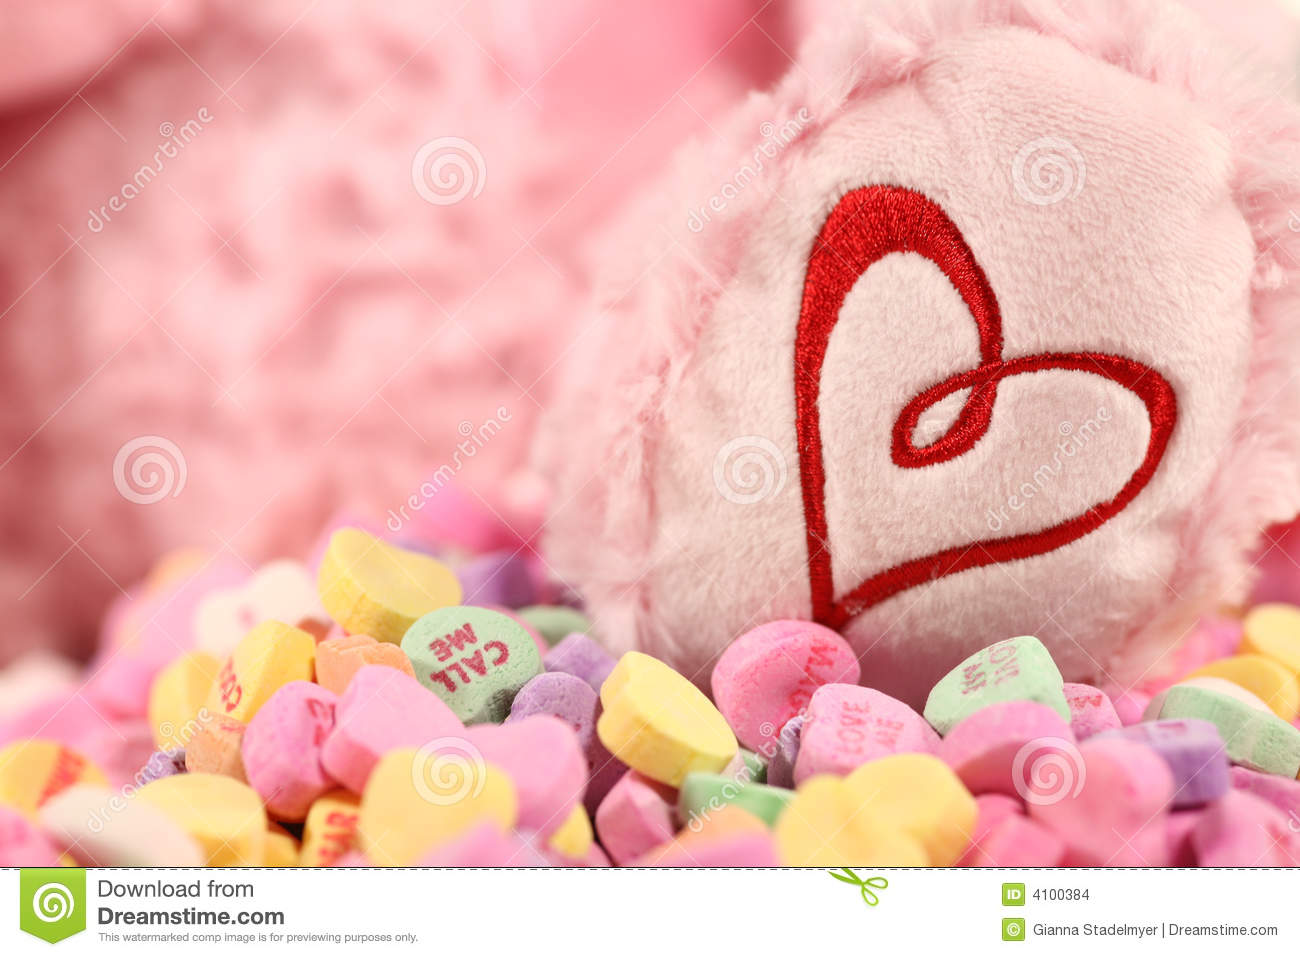 Fuzzy Bear Paw Embroidered With A Heart And Some Candy Conversation